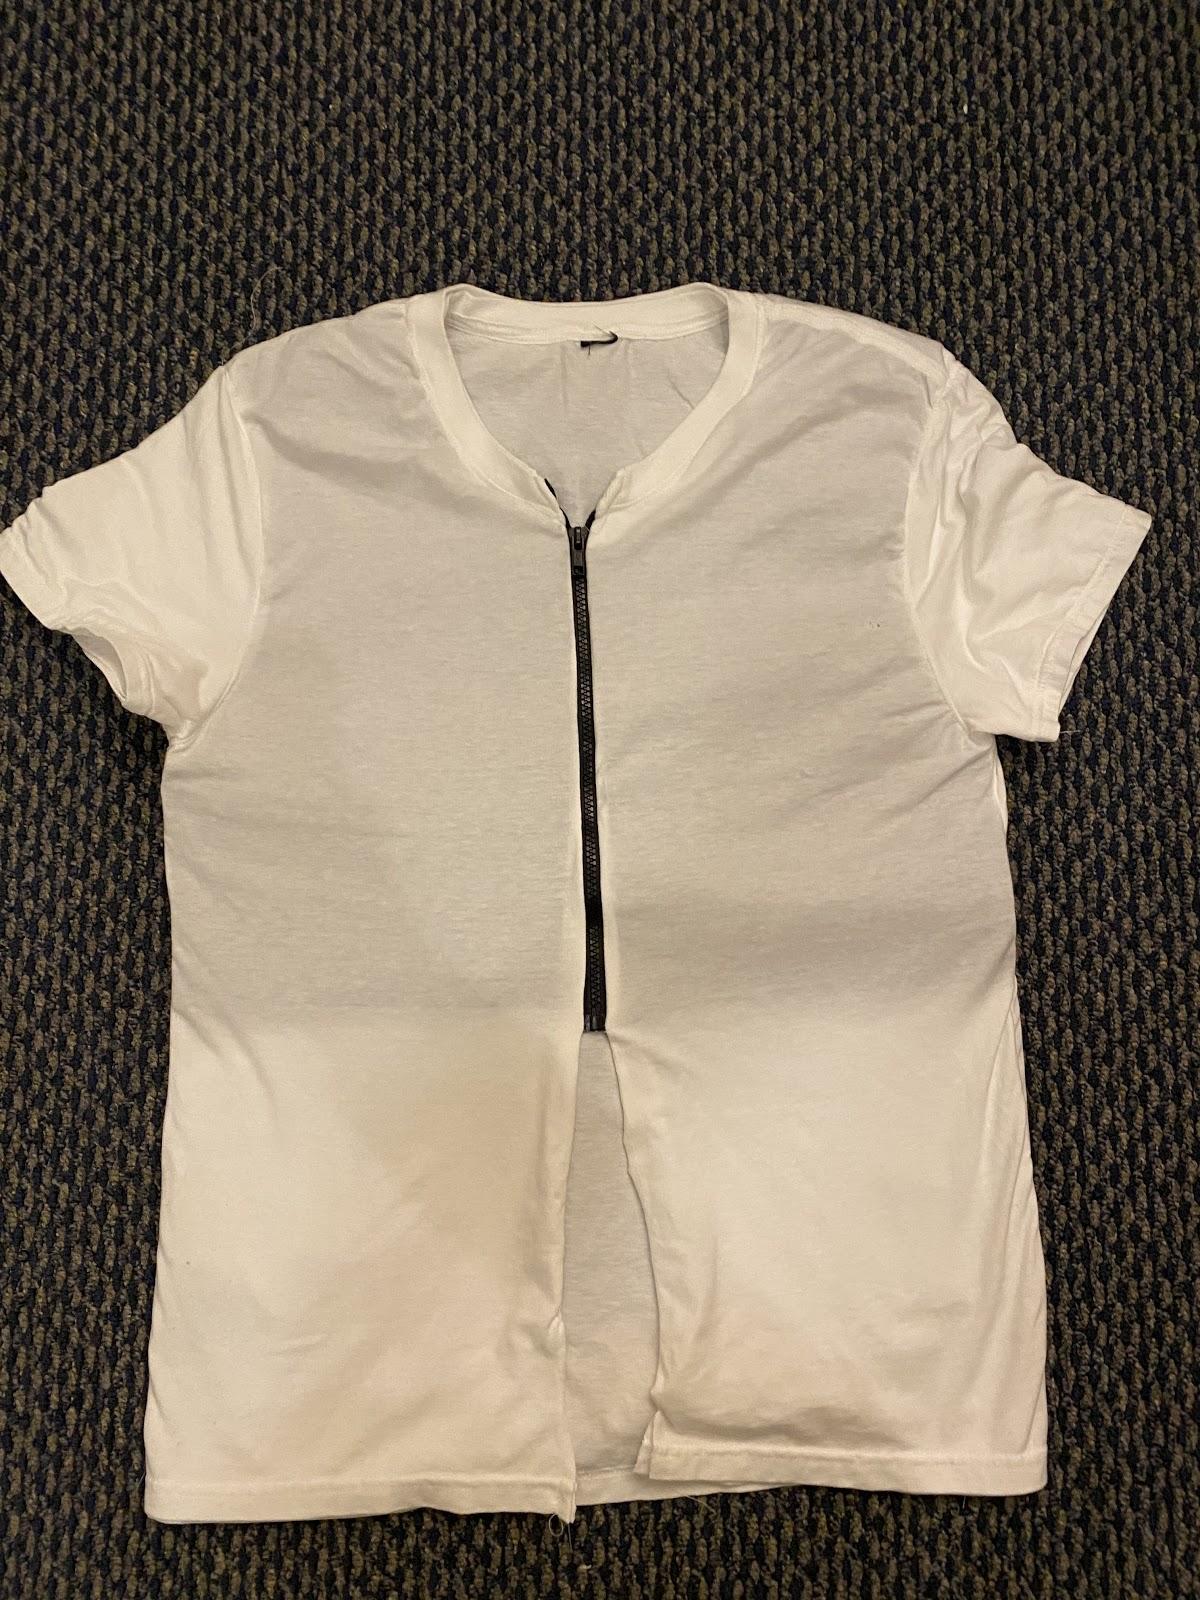 A white shirt on a grey surface

Description automatically generated with low confidence